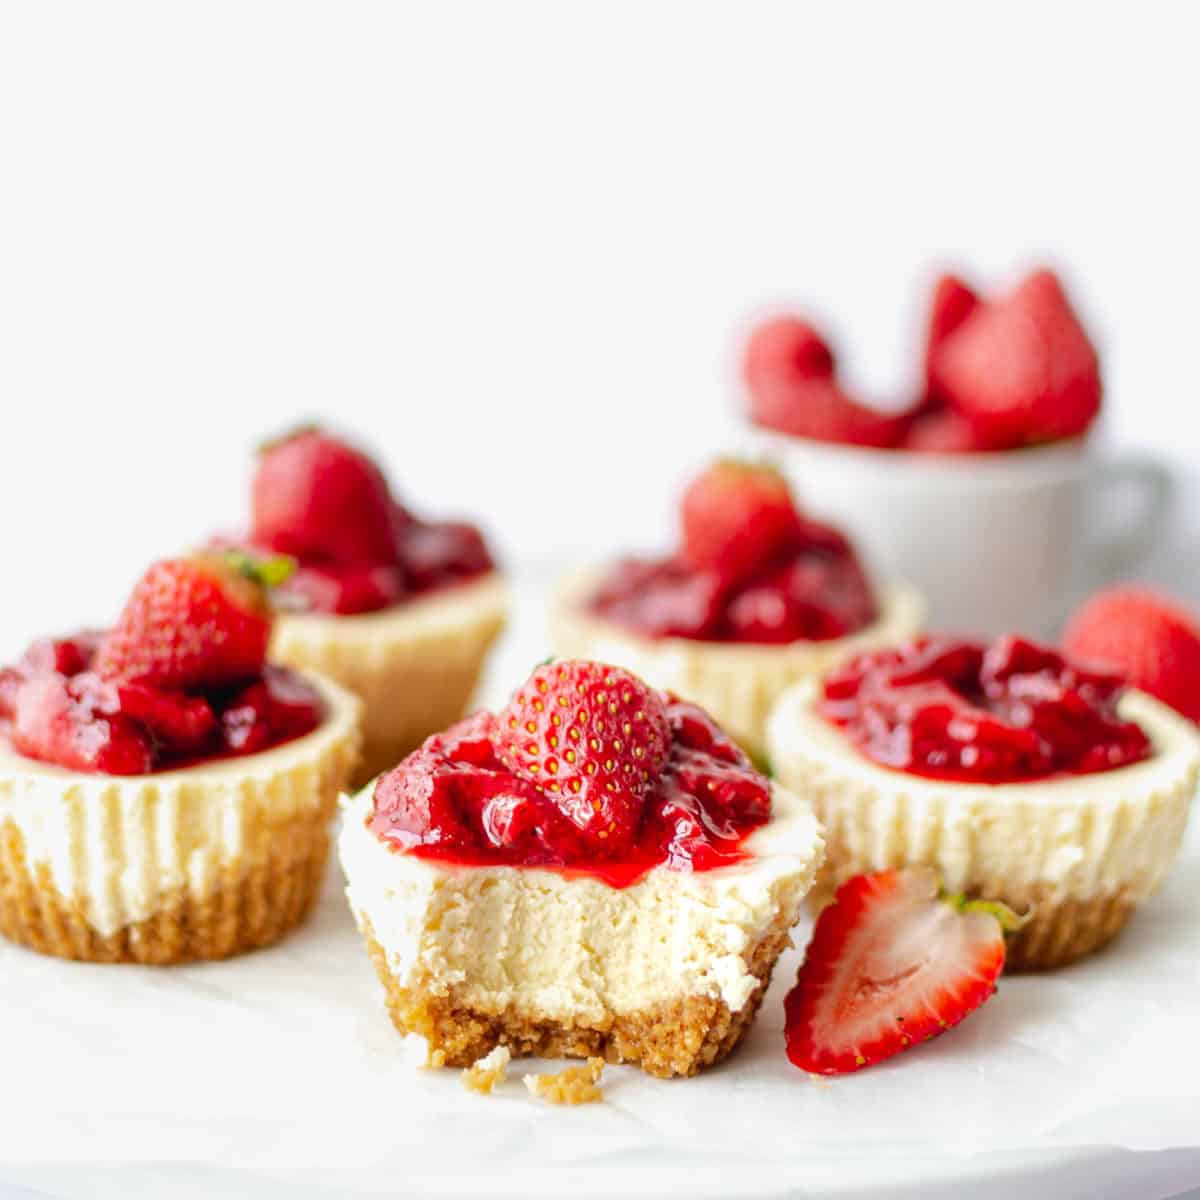 A mini strawberry cheesecake with a bite taken from it.